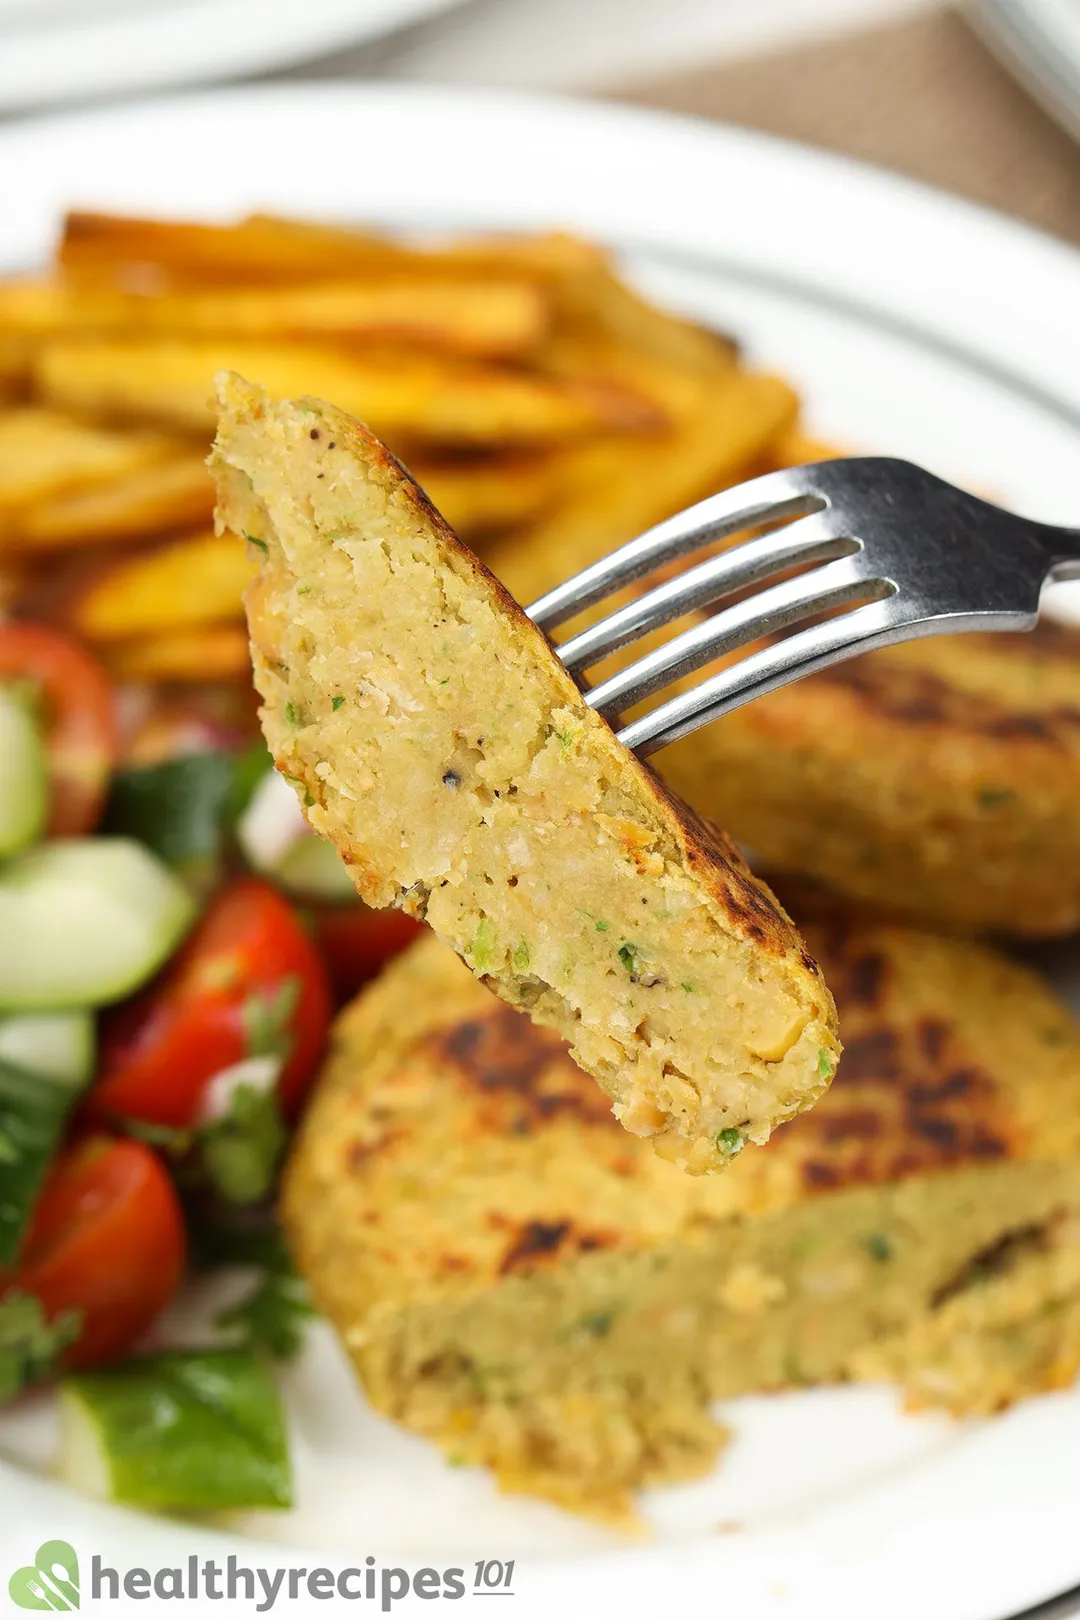 A fork piercing into a piece of chickpea patties with a plate of food in the blurred background.